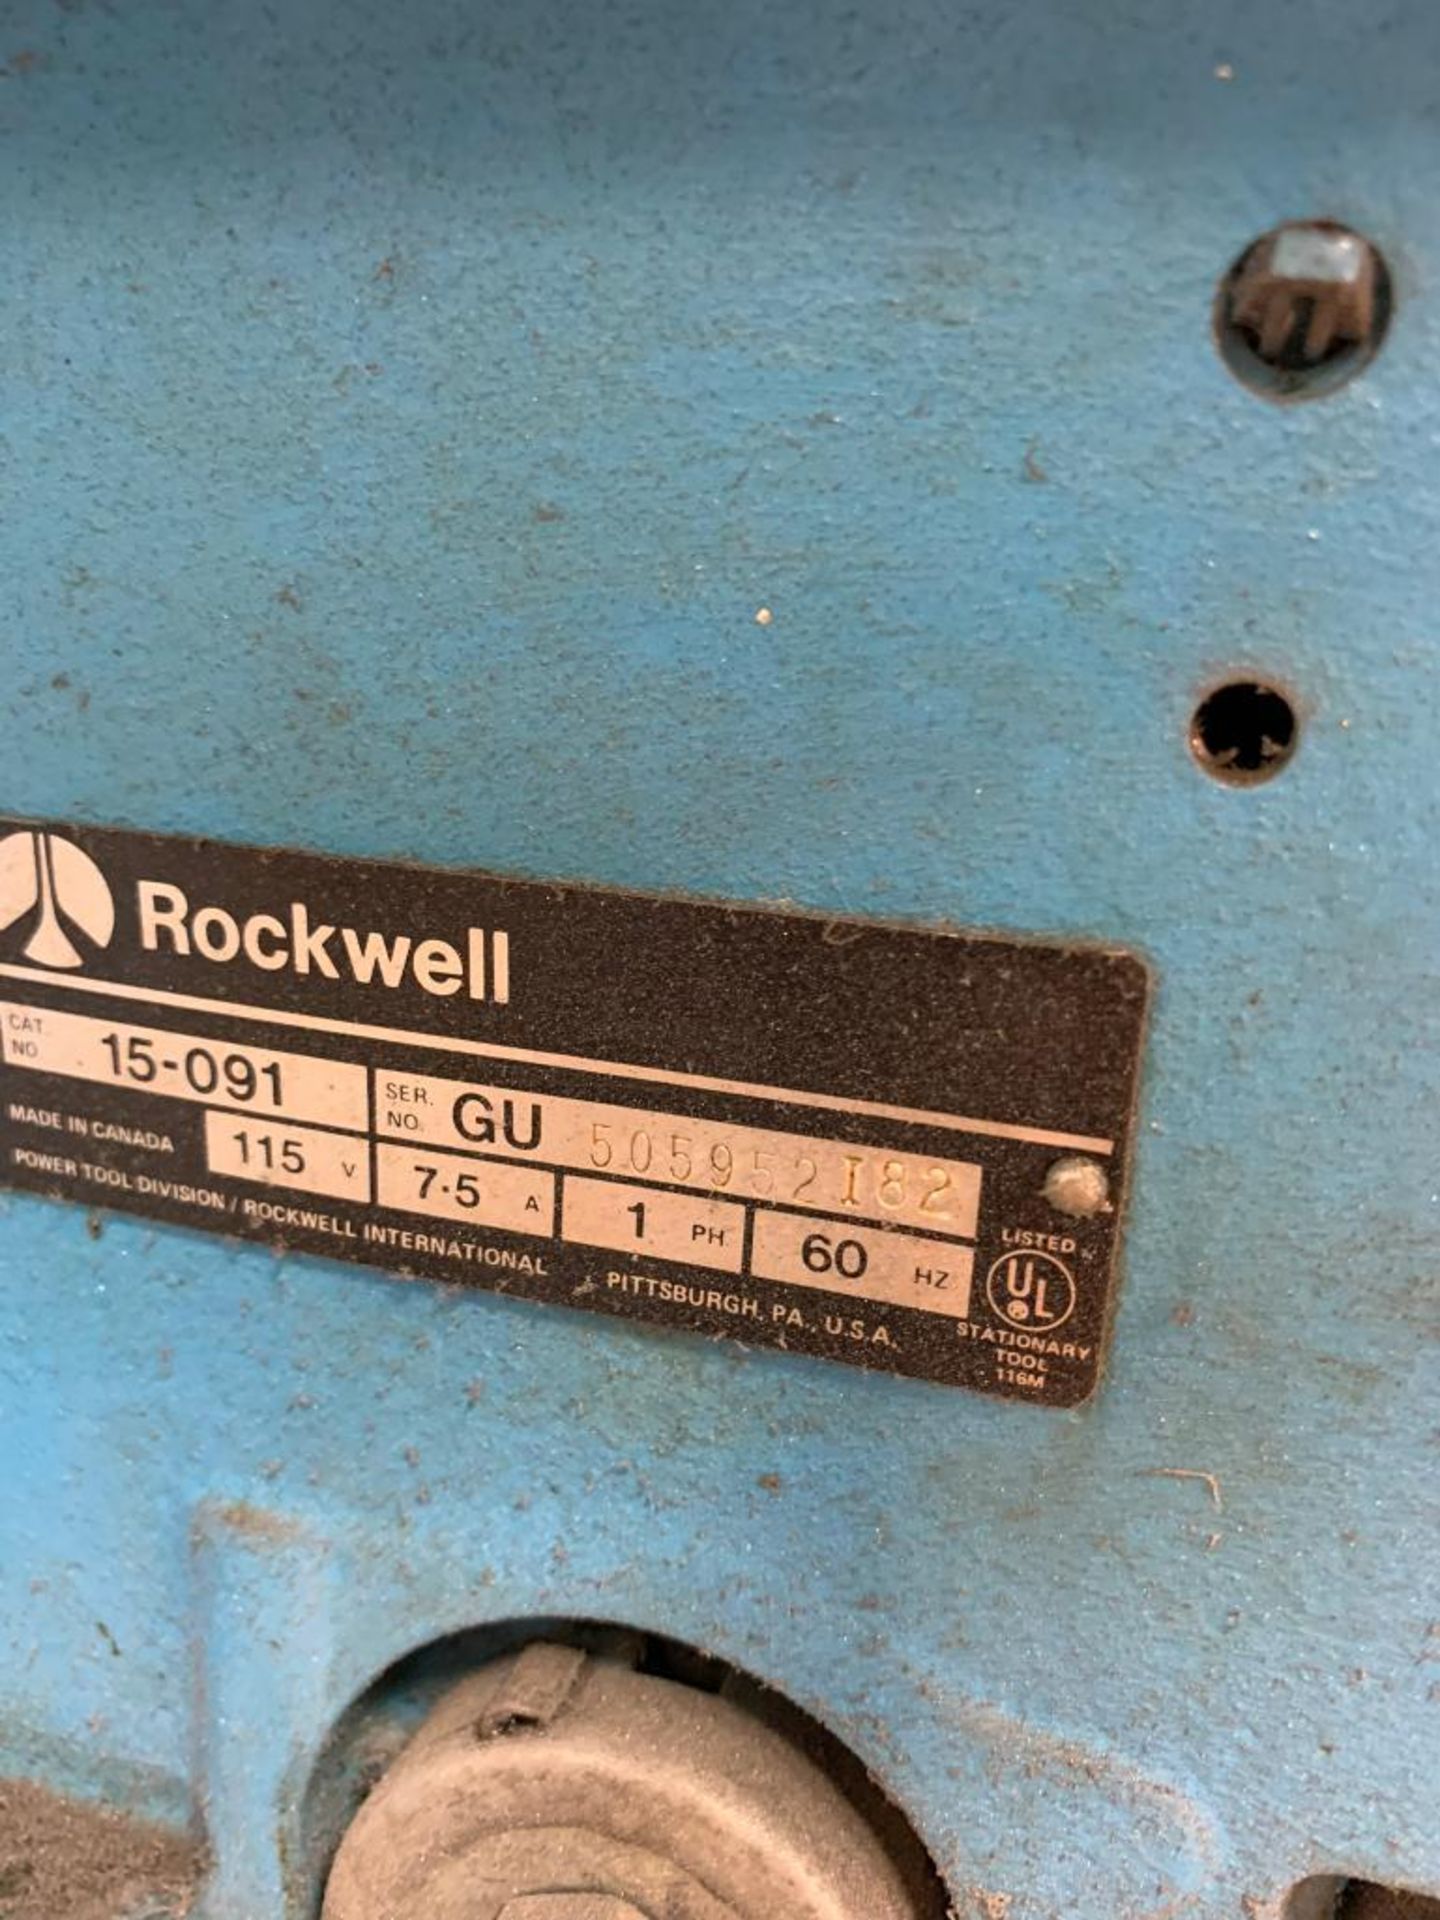 Rockwell Pedestal Drill Press, Model 15, Tapmatic Tapping Head, 115 V - Image 3 of 3